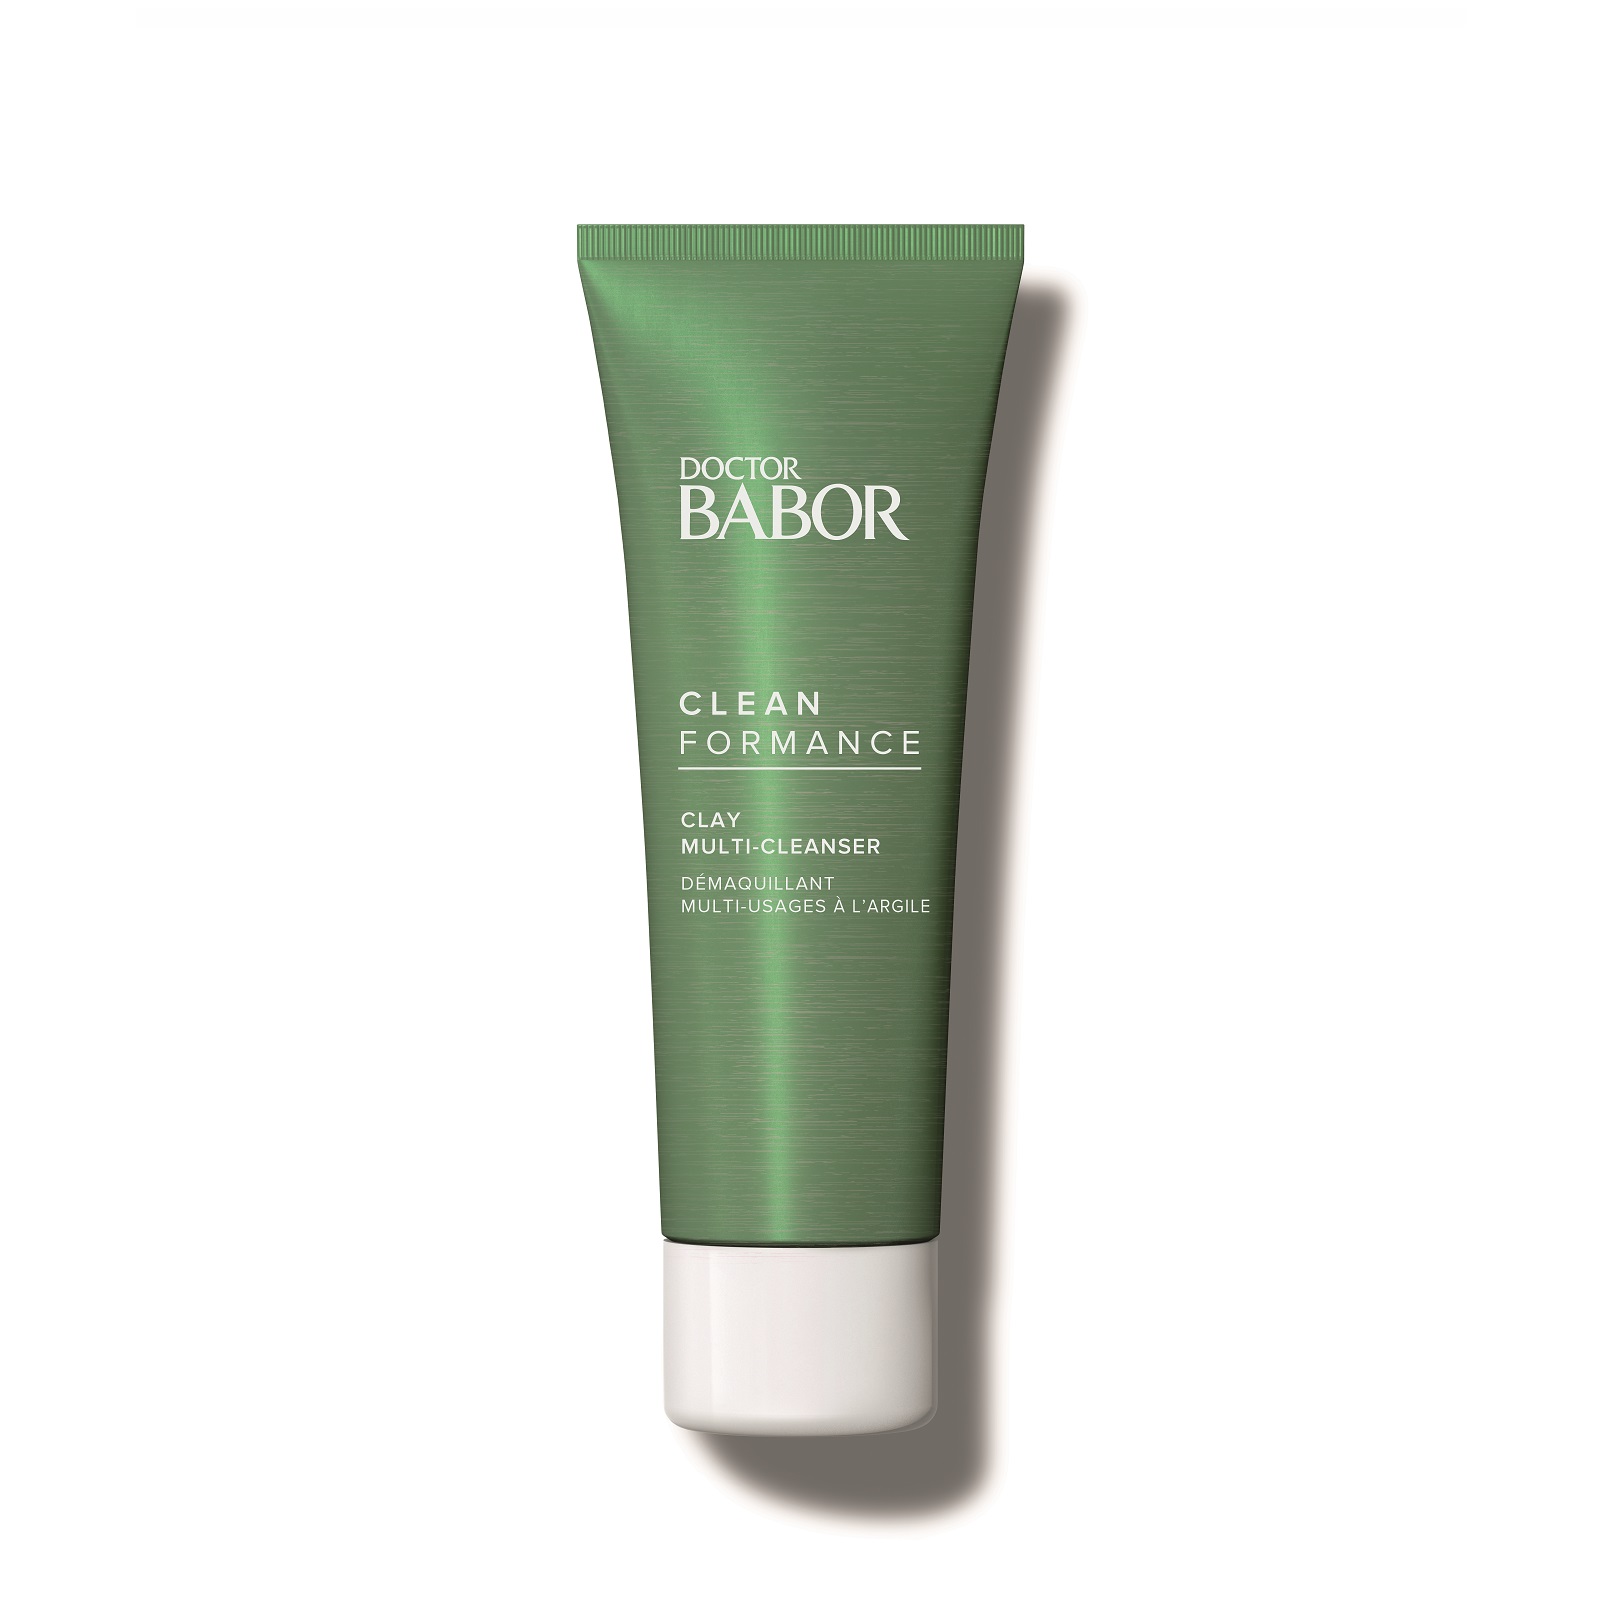 Dr. BABOR Cleanformance Clay Multi-Cleanser